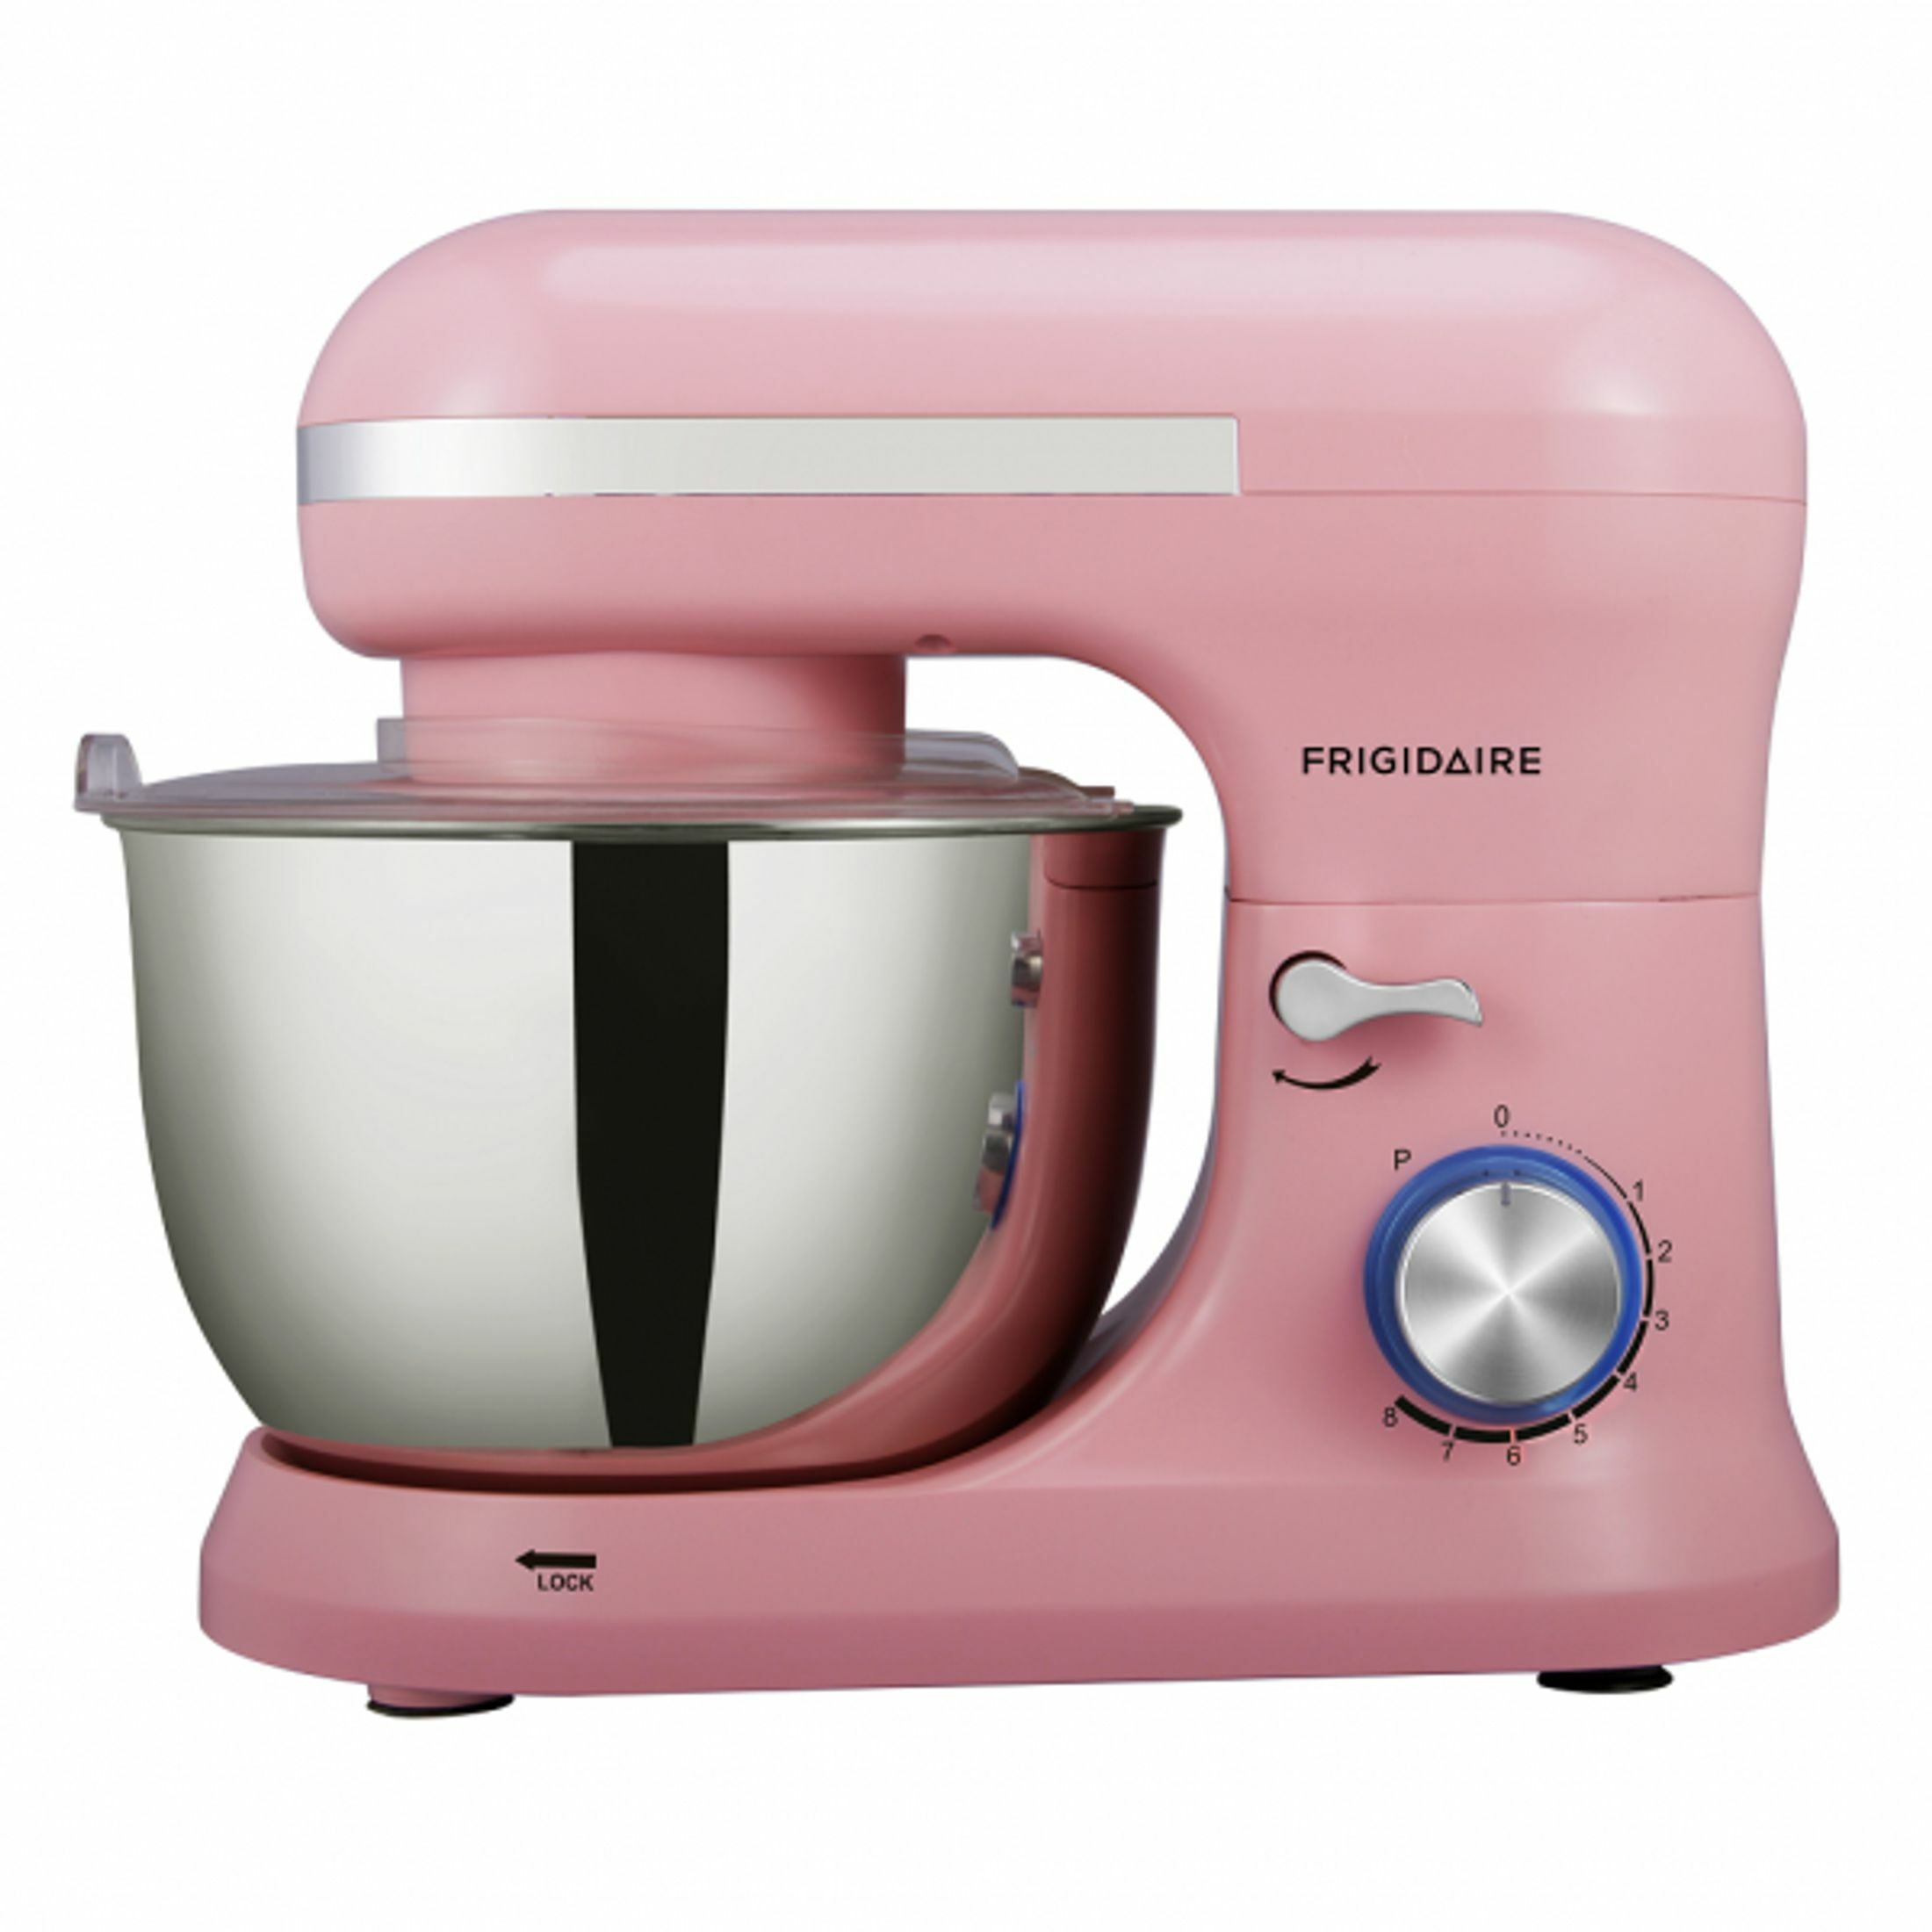 Bosch Mixer Review  Passionate Homemaking ARCHIVE